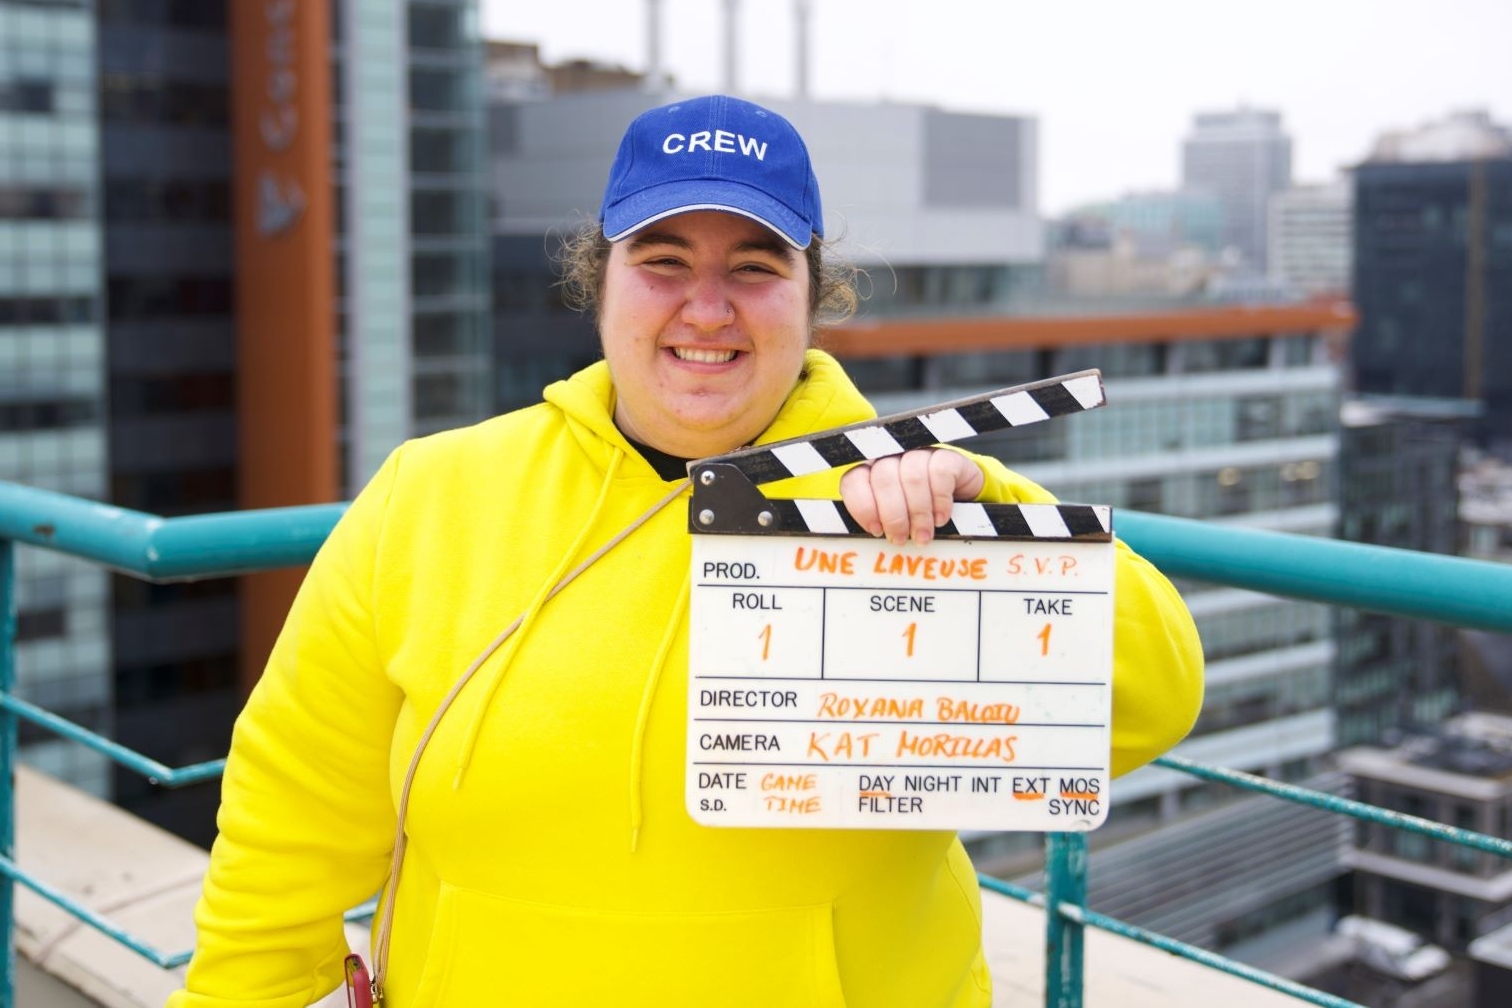 Roxana Biloiu wears a yellow sweatshirt and a blue cap with the word CREW on it and holds the clapperboard for her film "Une laveuse svp"